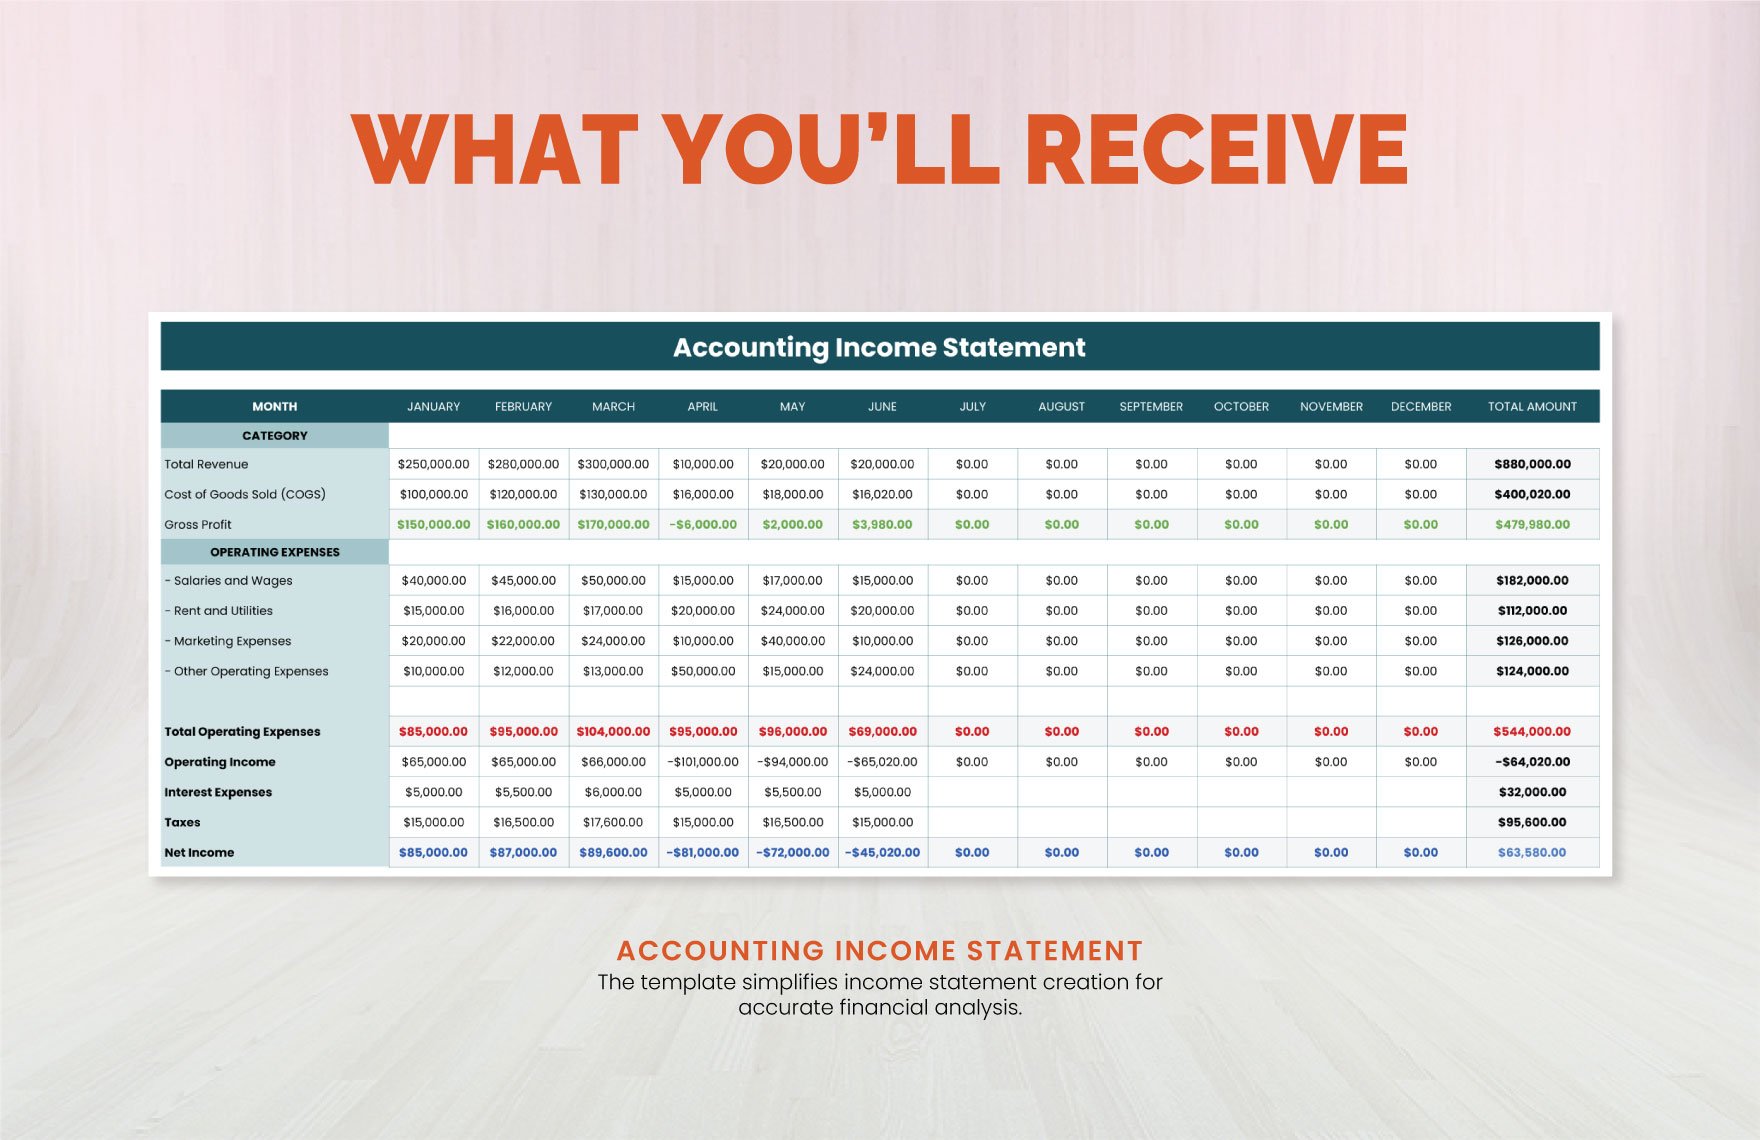 Accounting Income Statement Template